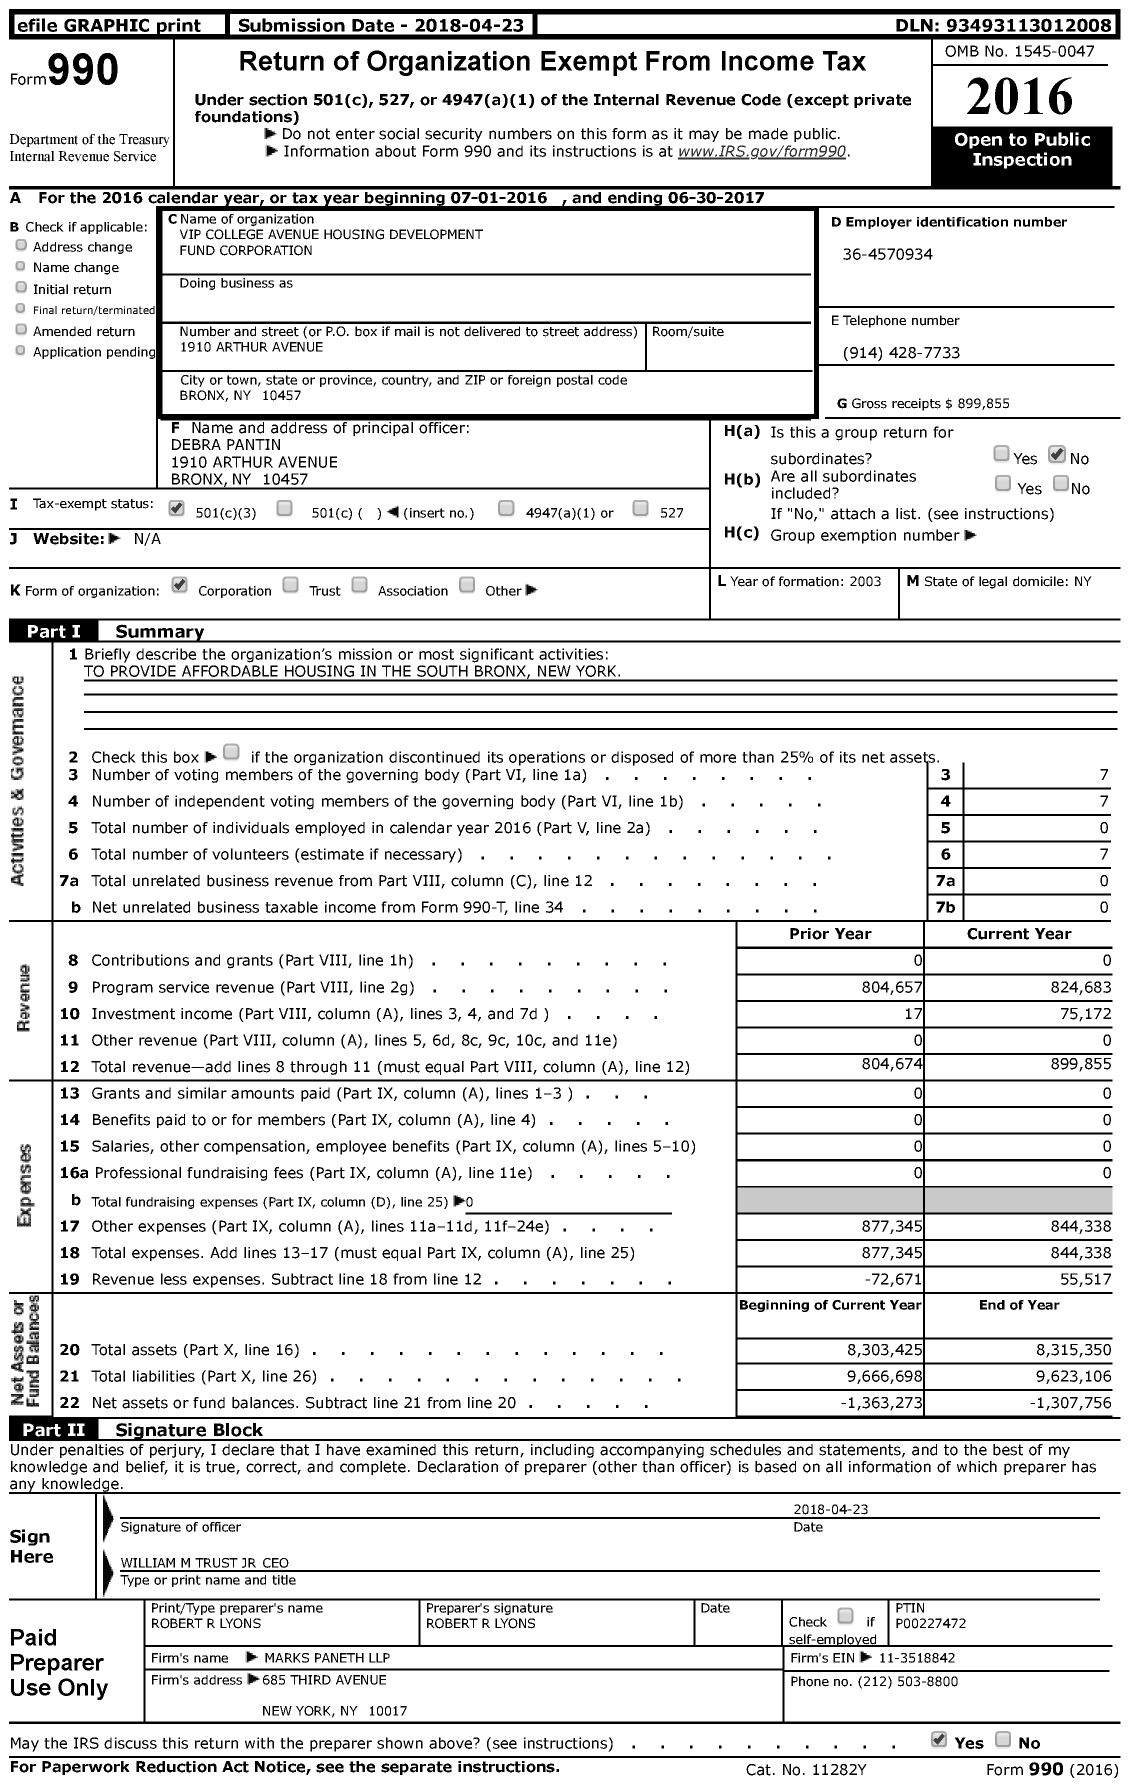 Image of first page of 2016 Form 990 for VIP College Avenue Housing Development Fund Corporation